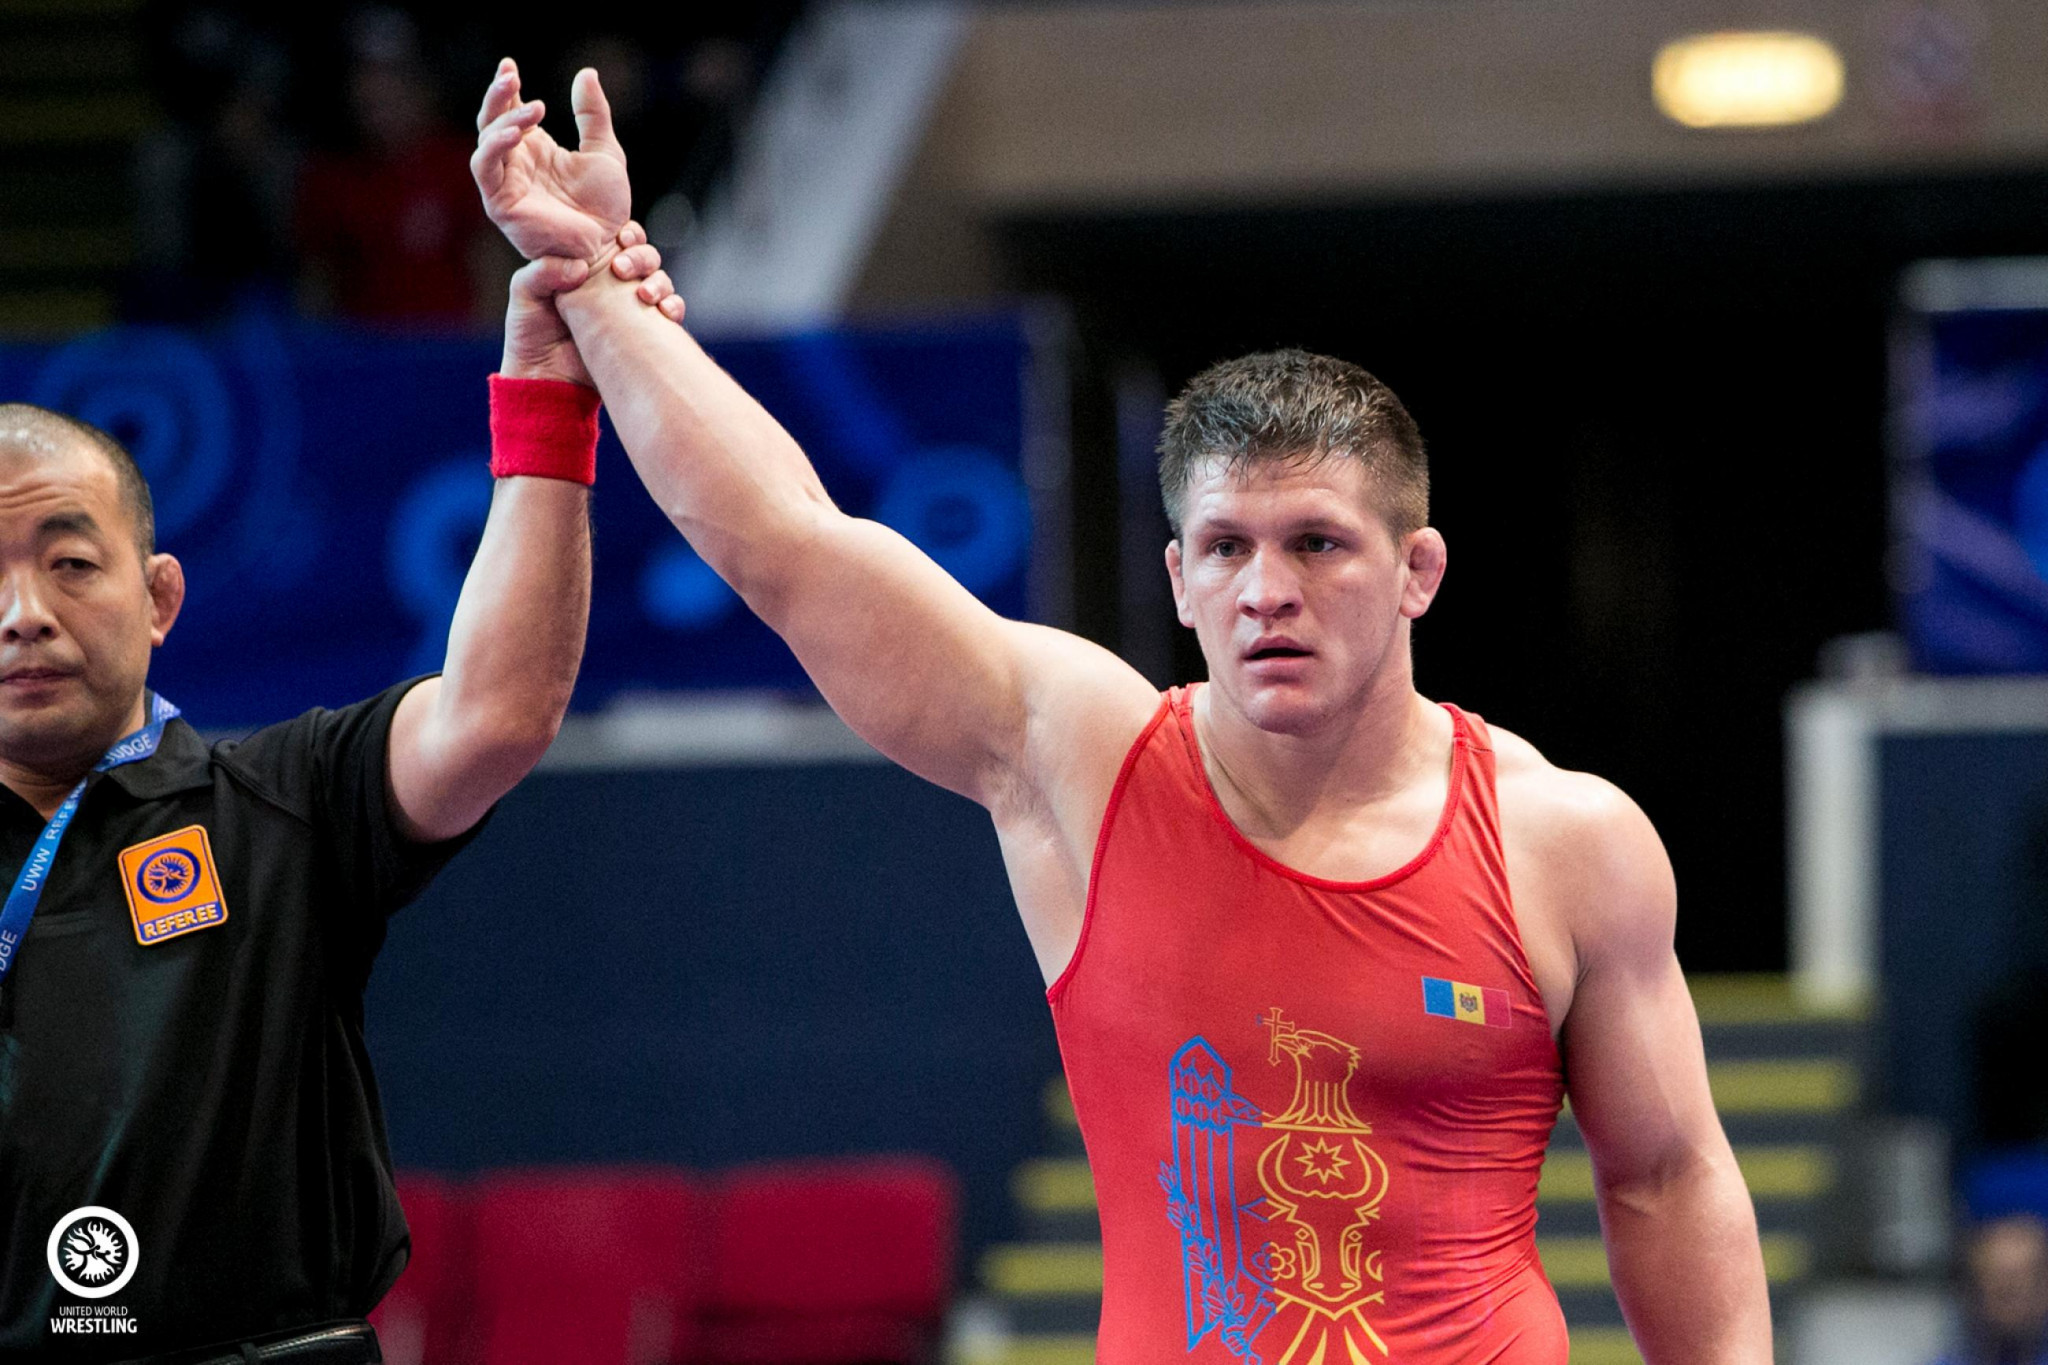 Moldova's defending champion Daniel Cataraga has reached the final in the 77kg class at the UWW Under-23 World Championships in Bucharest ©UWW